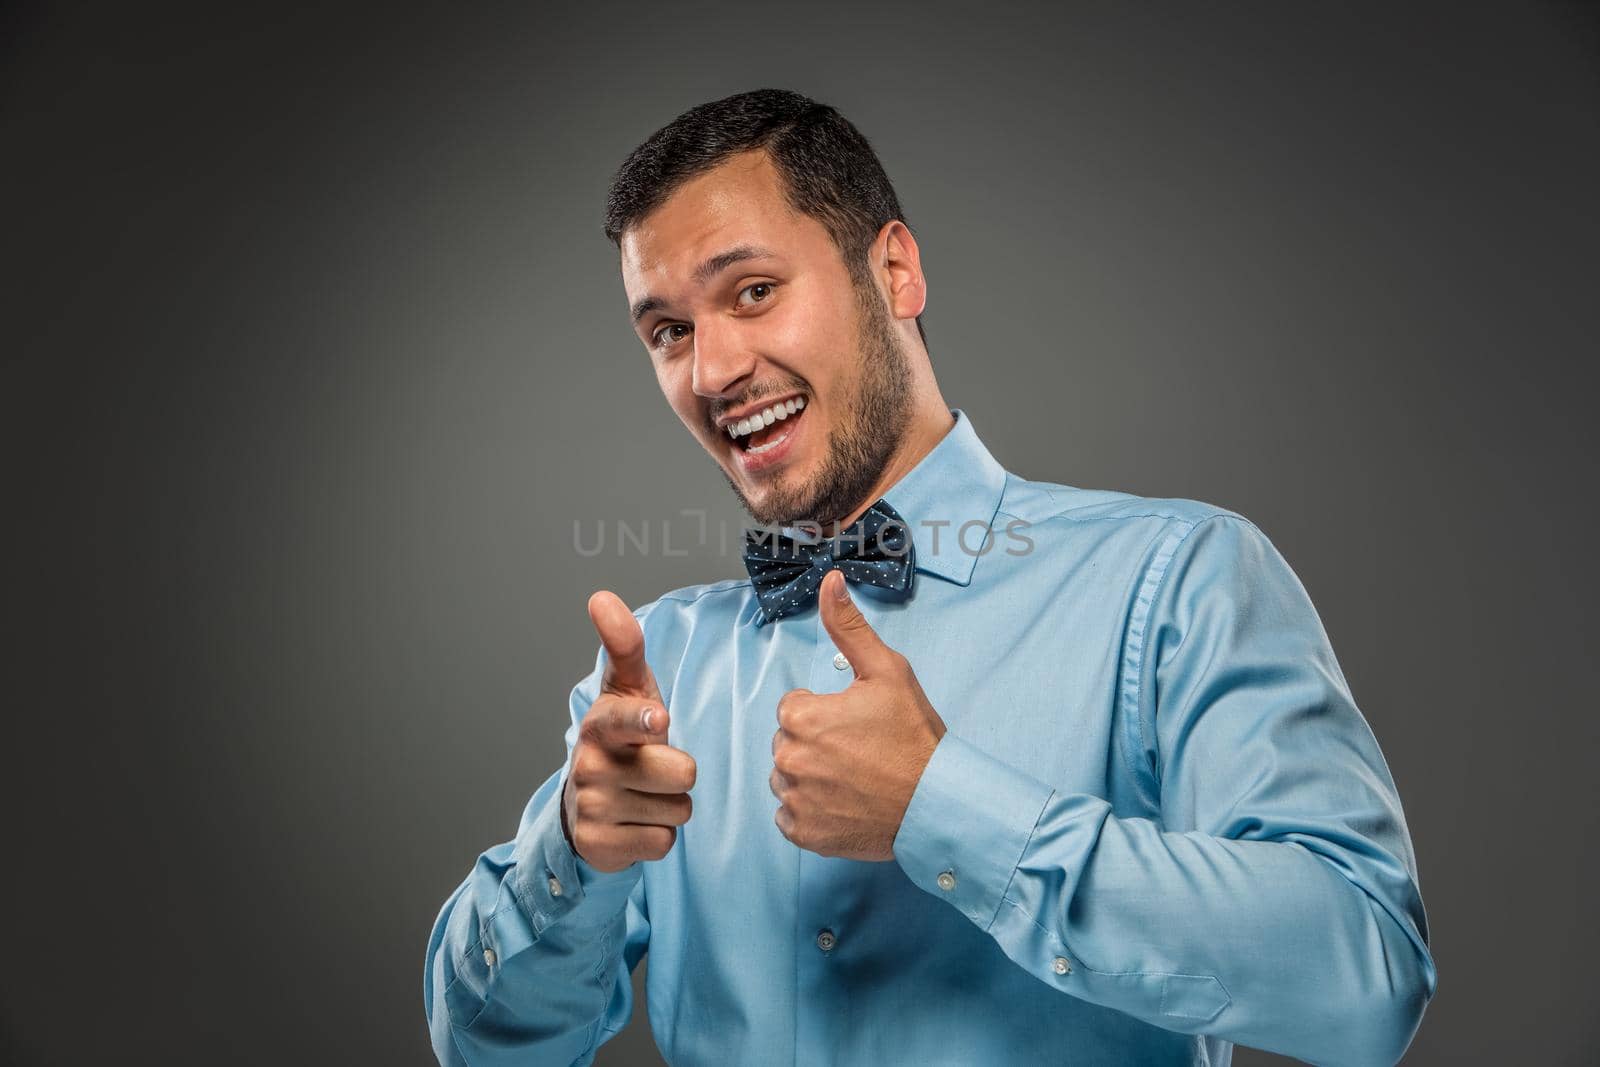 Closeup portrait of excited, energetic, happy, smiling man in blue shirt and butterfly tie is gesturing with his hand, pointing finger at camera isolated on gray background. Positive human emotion facial expression